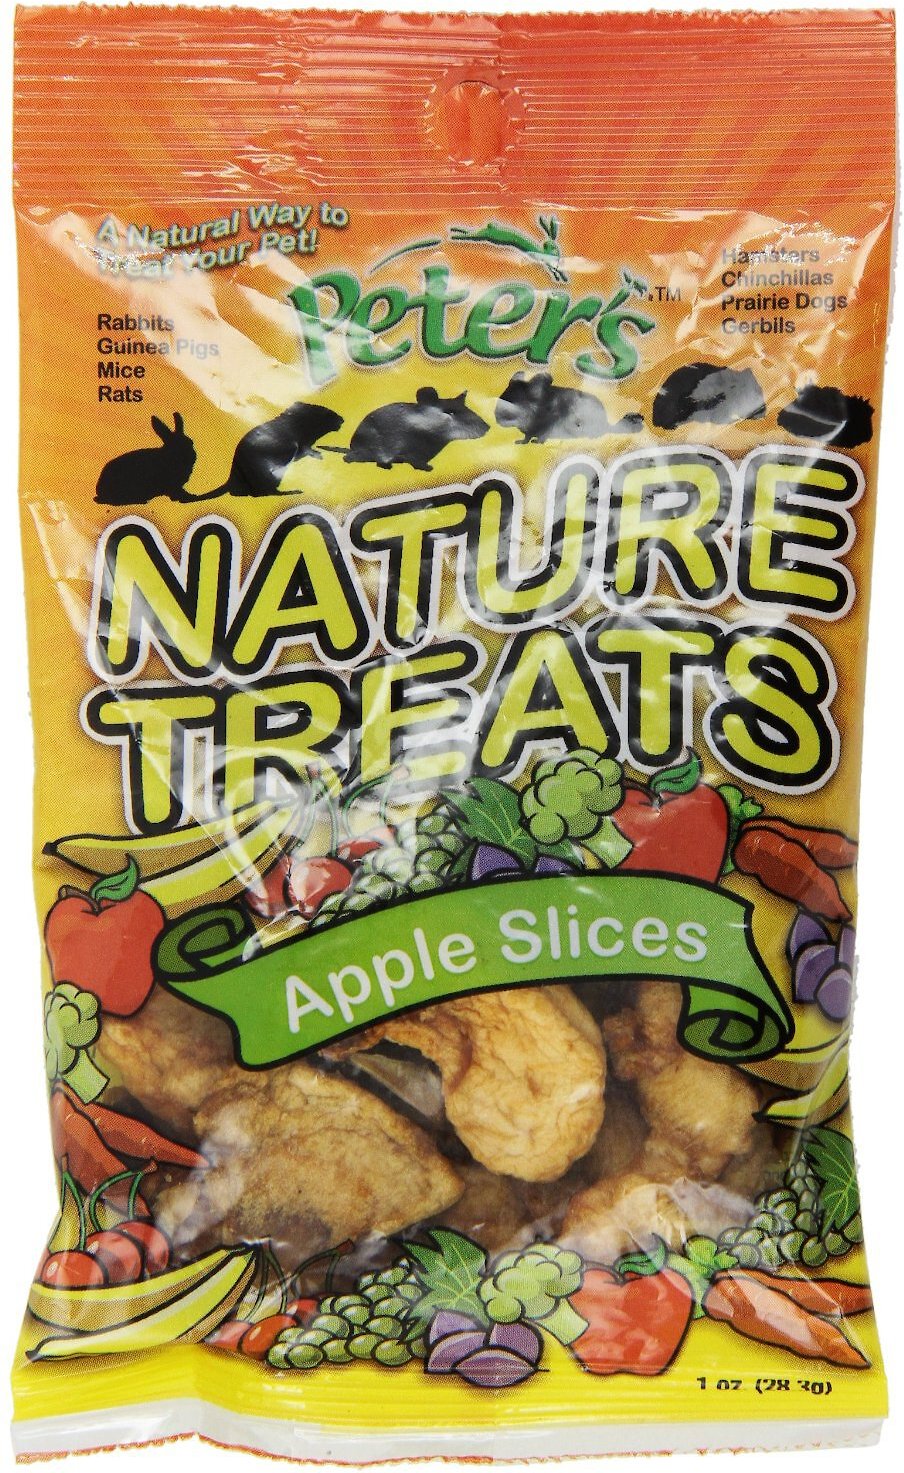 10. Peter’s Apple Slices Small Animal Nature Treats